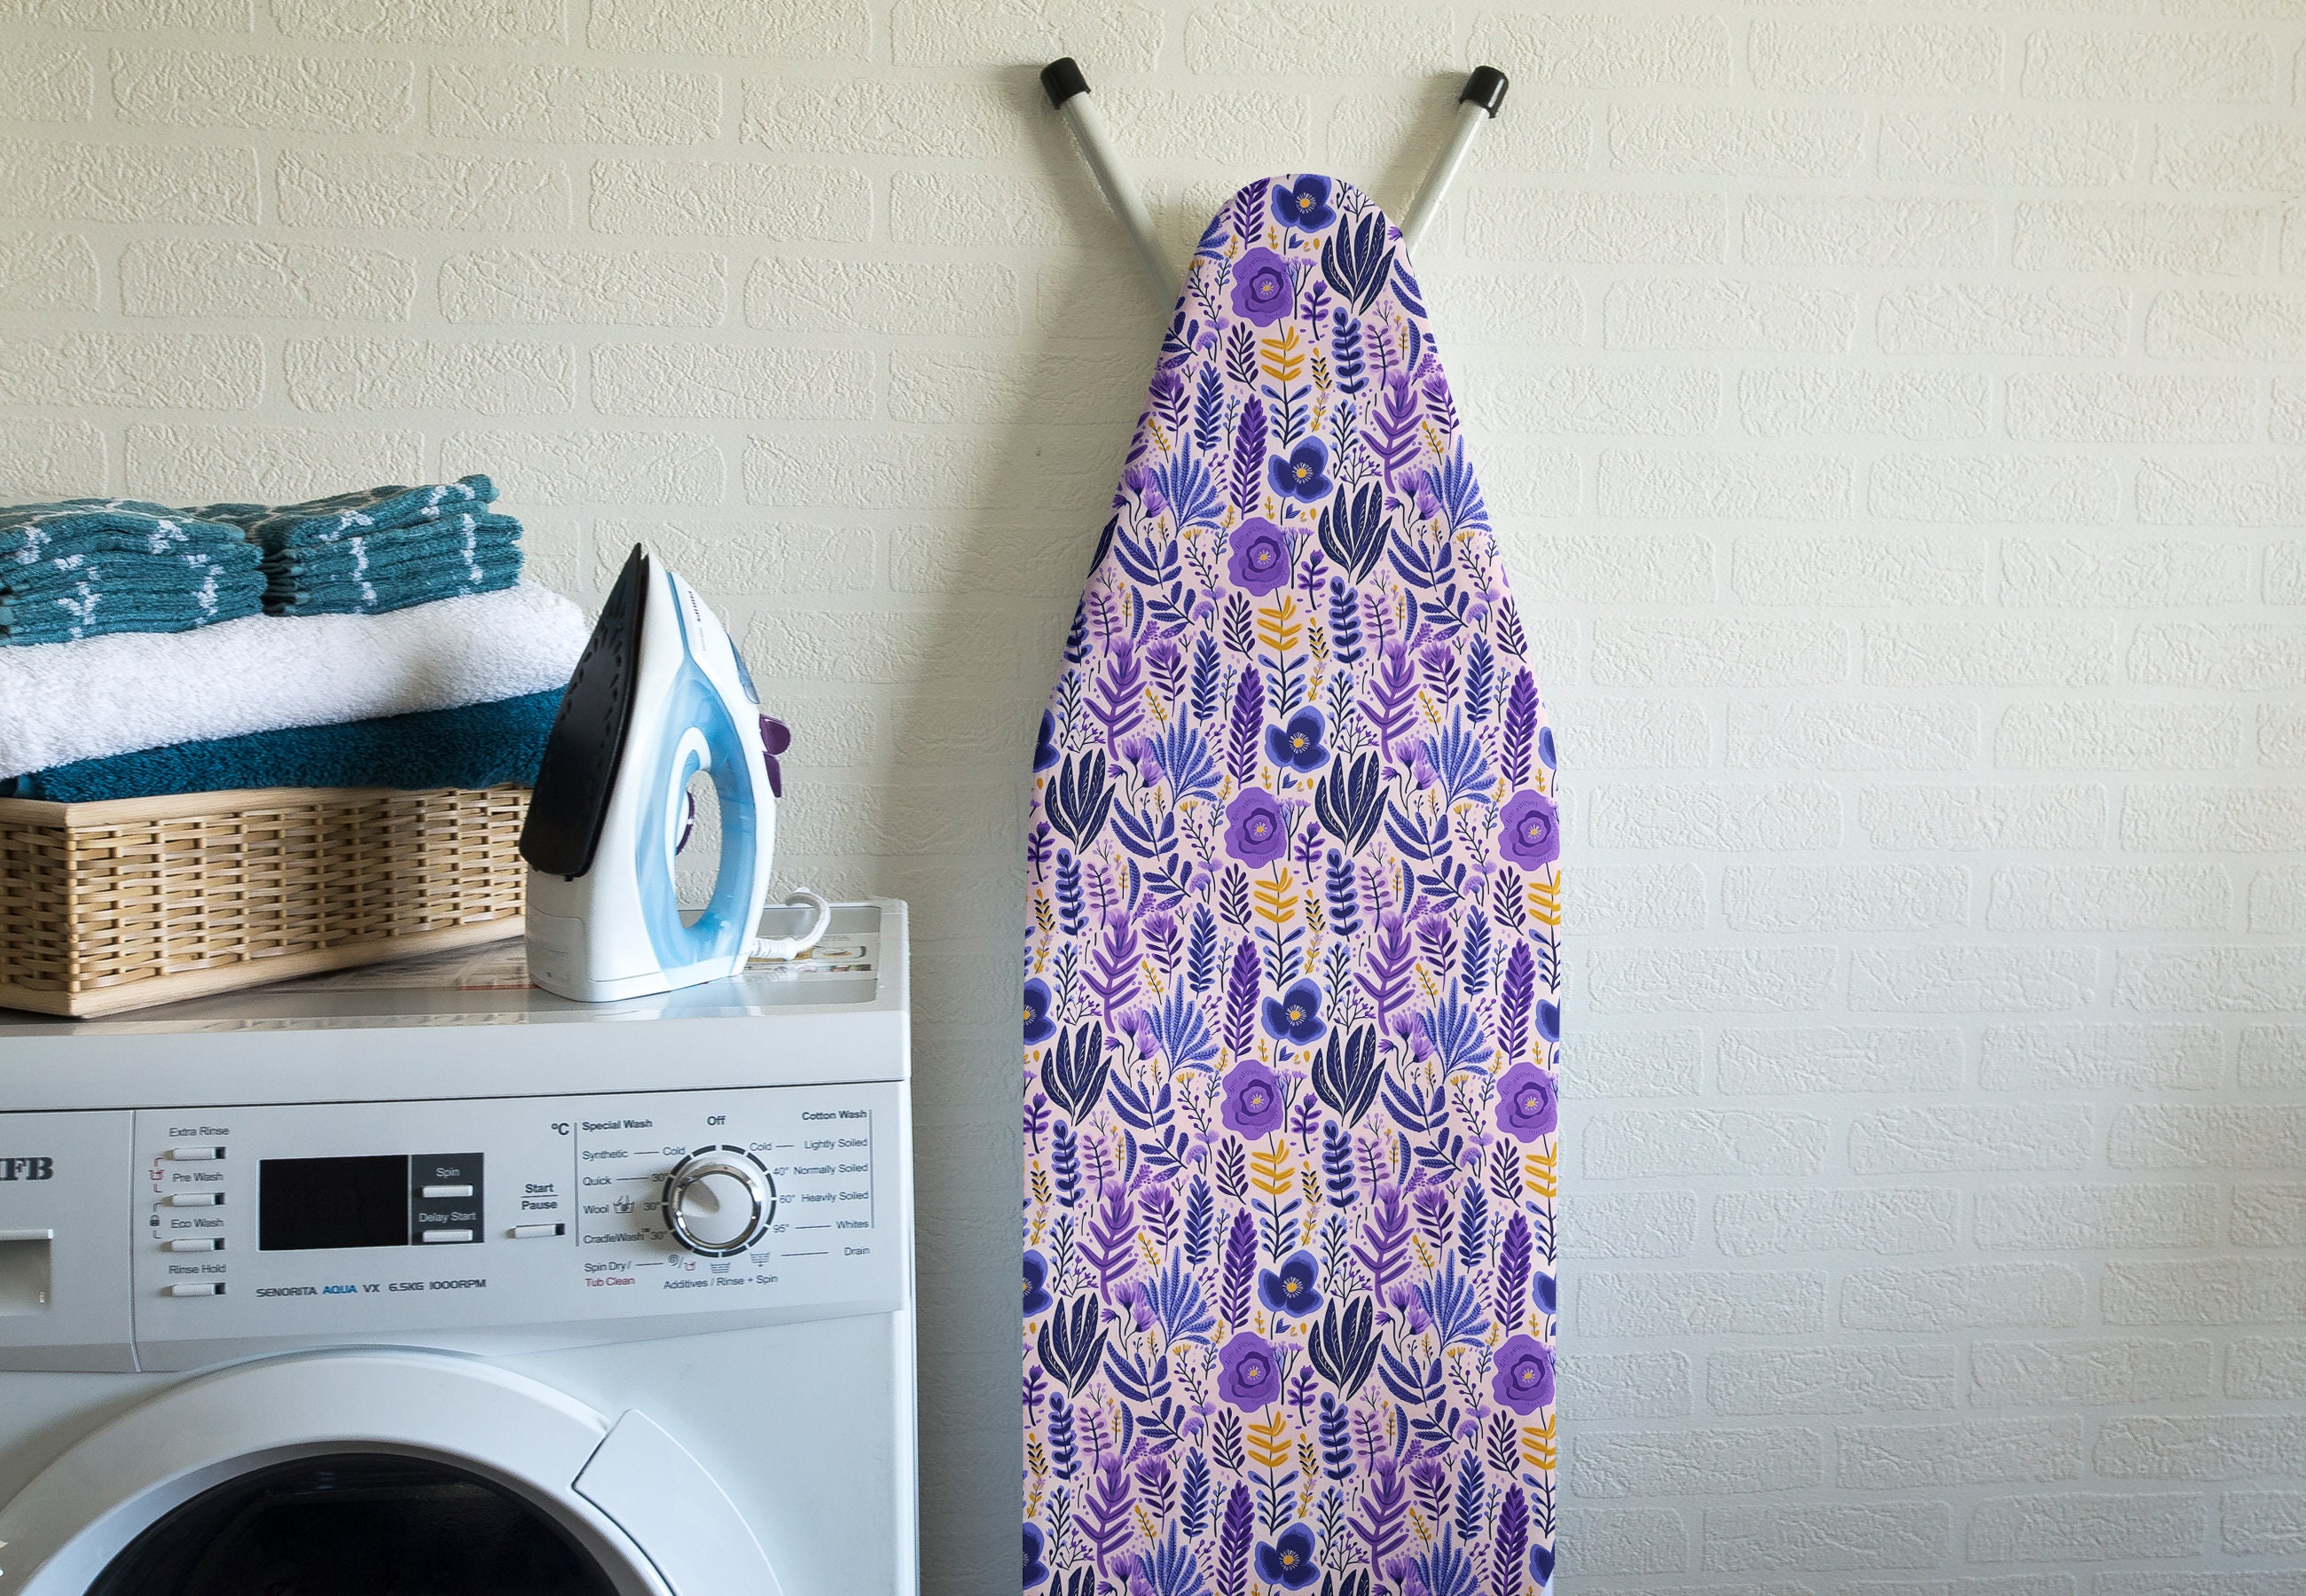 PADDED Ironing Board Cover With ELASTIC Around Edges, Riley Blake